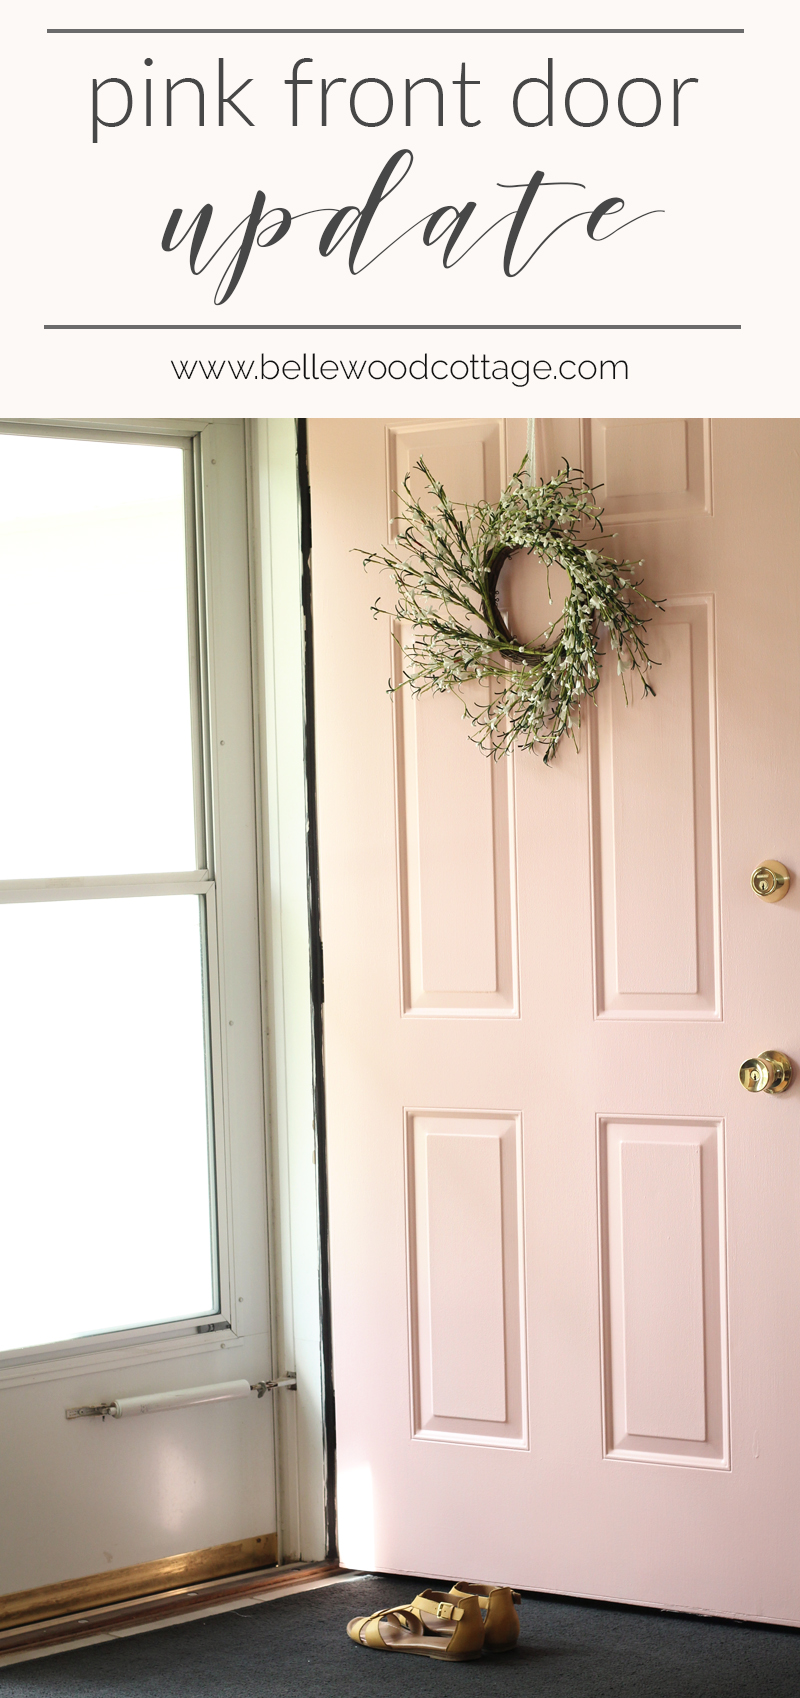 We painted our front door pink!